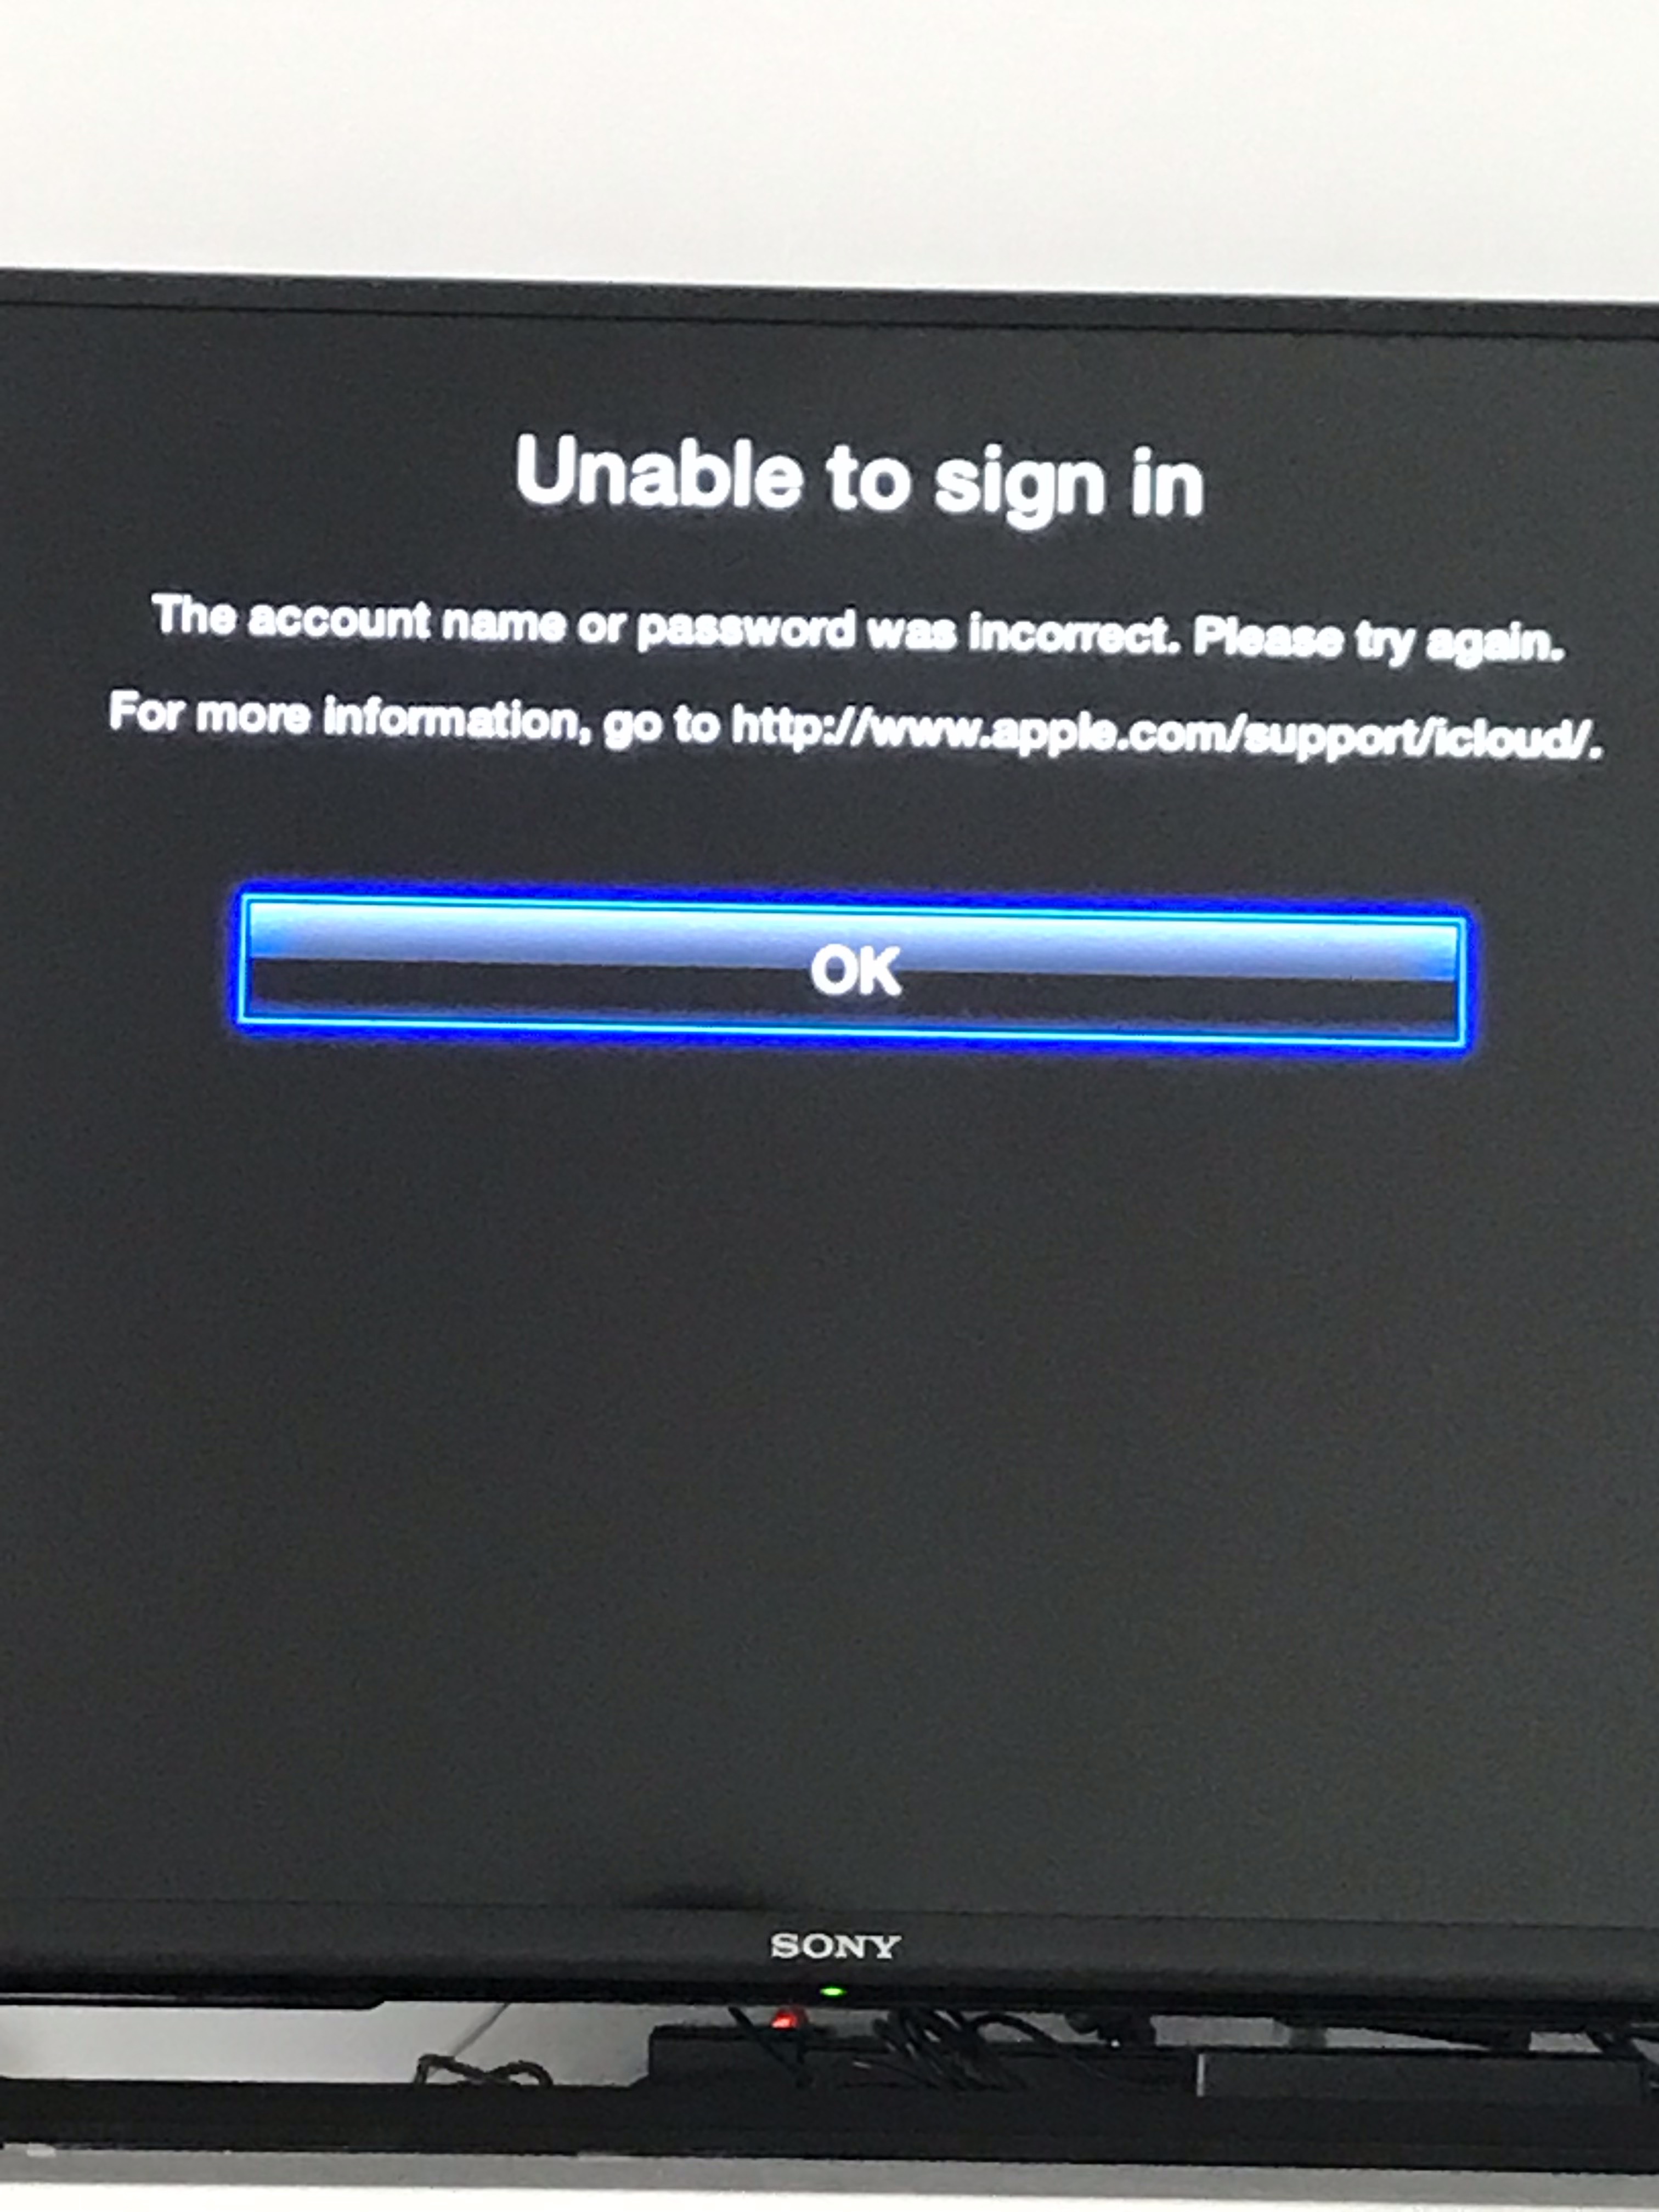 can't connect account in TV - Apple Community